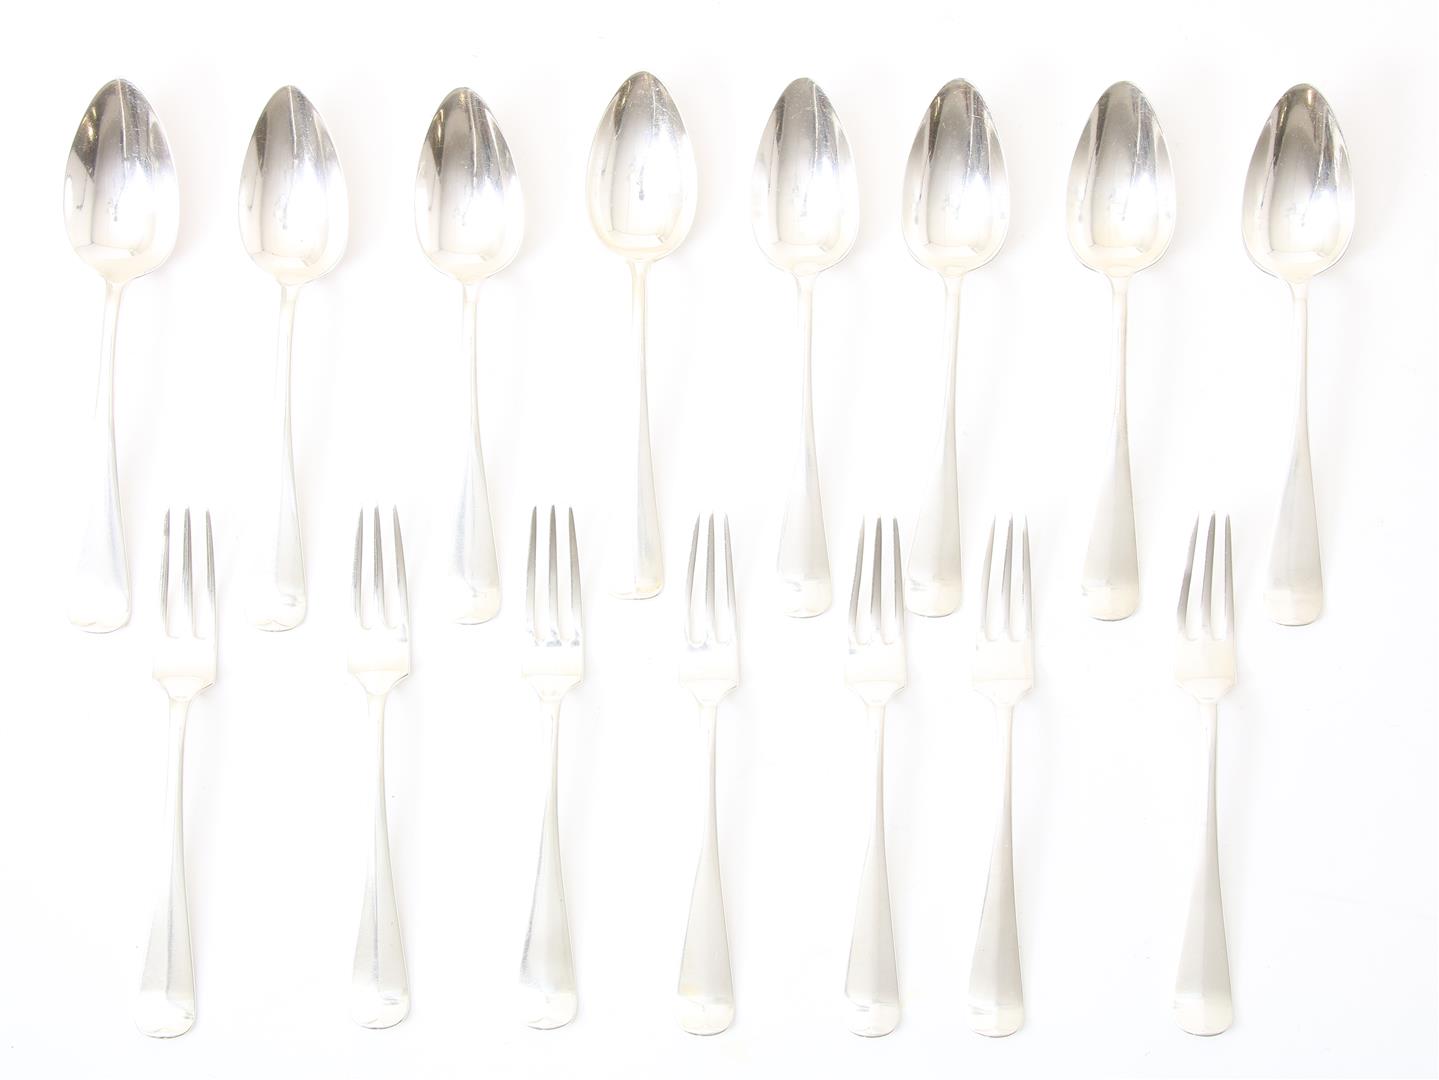 Series of 7 small silver forks and 8 small silver spoons, grade 835/000.